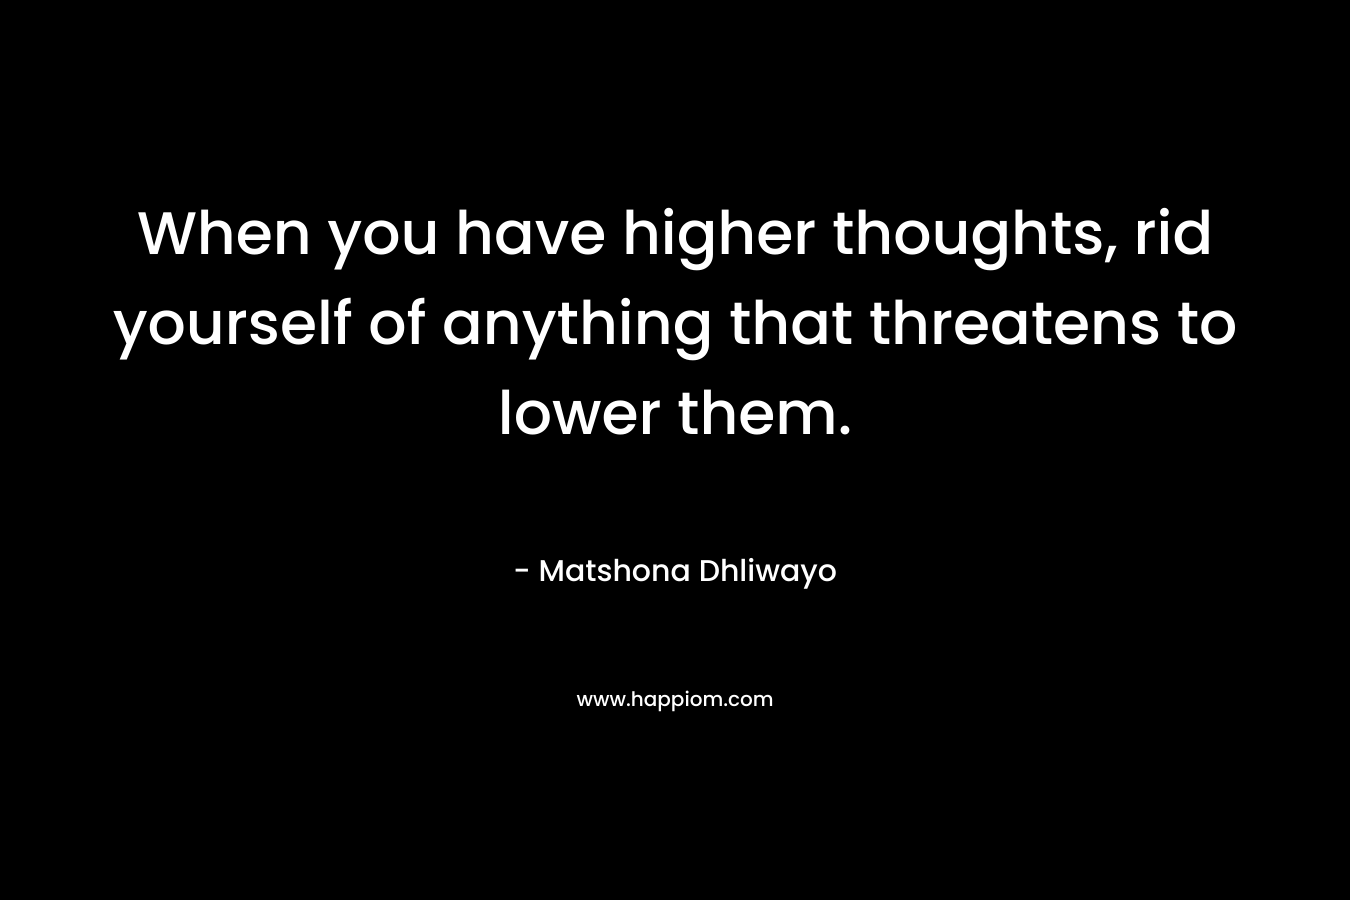 When you have higher thoughts, rid yourself of anything that threatens to lower them. – Matshona Dhliwayo